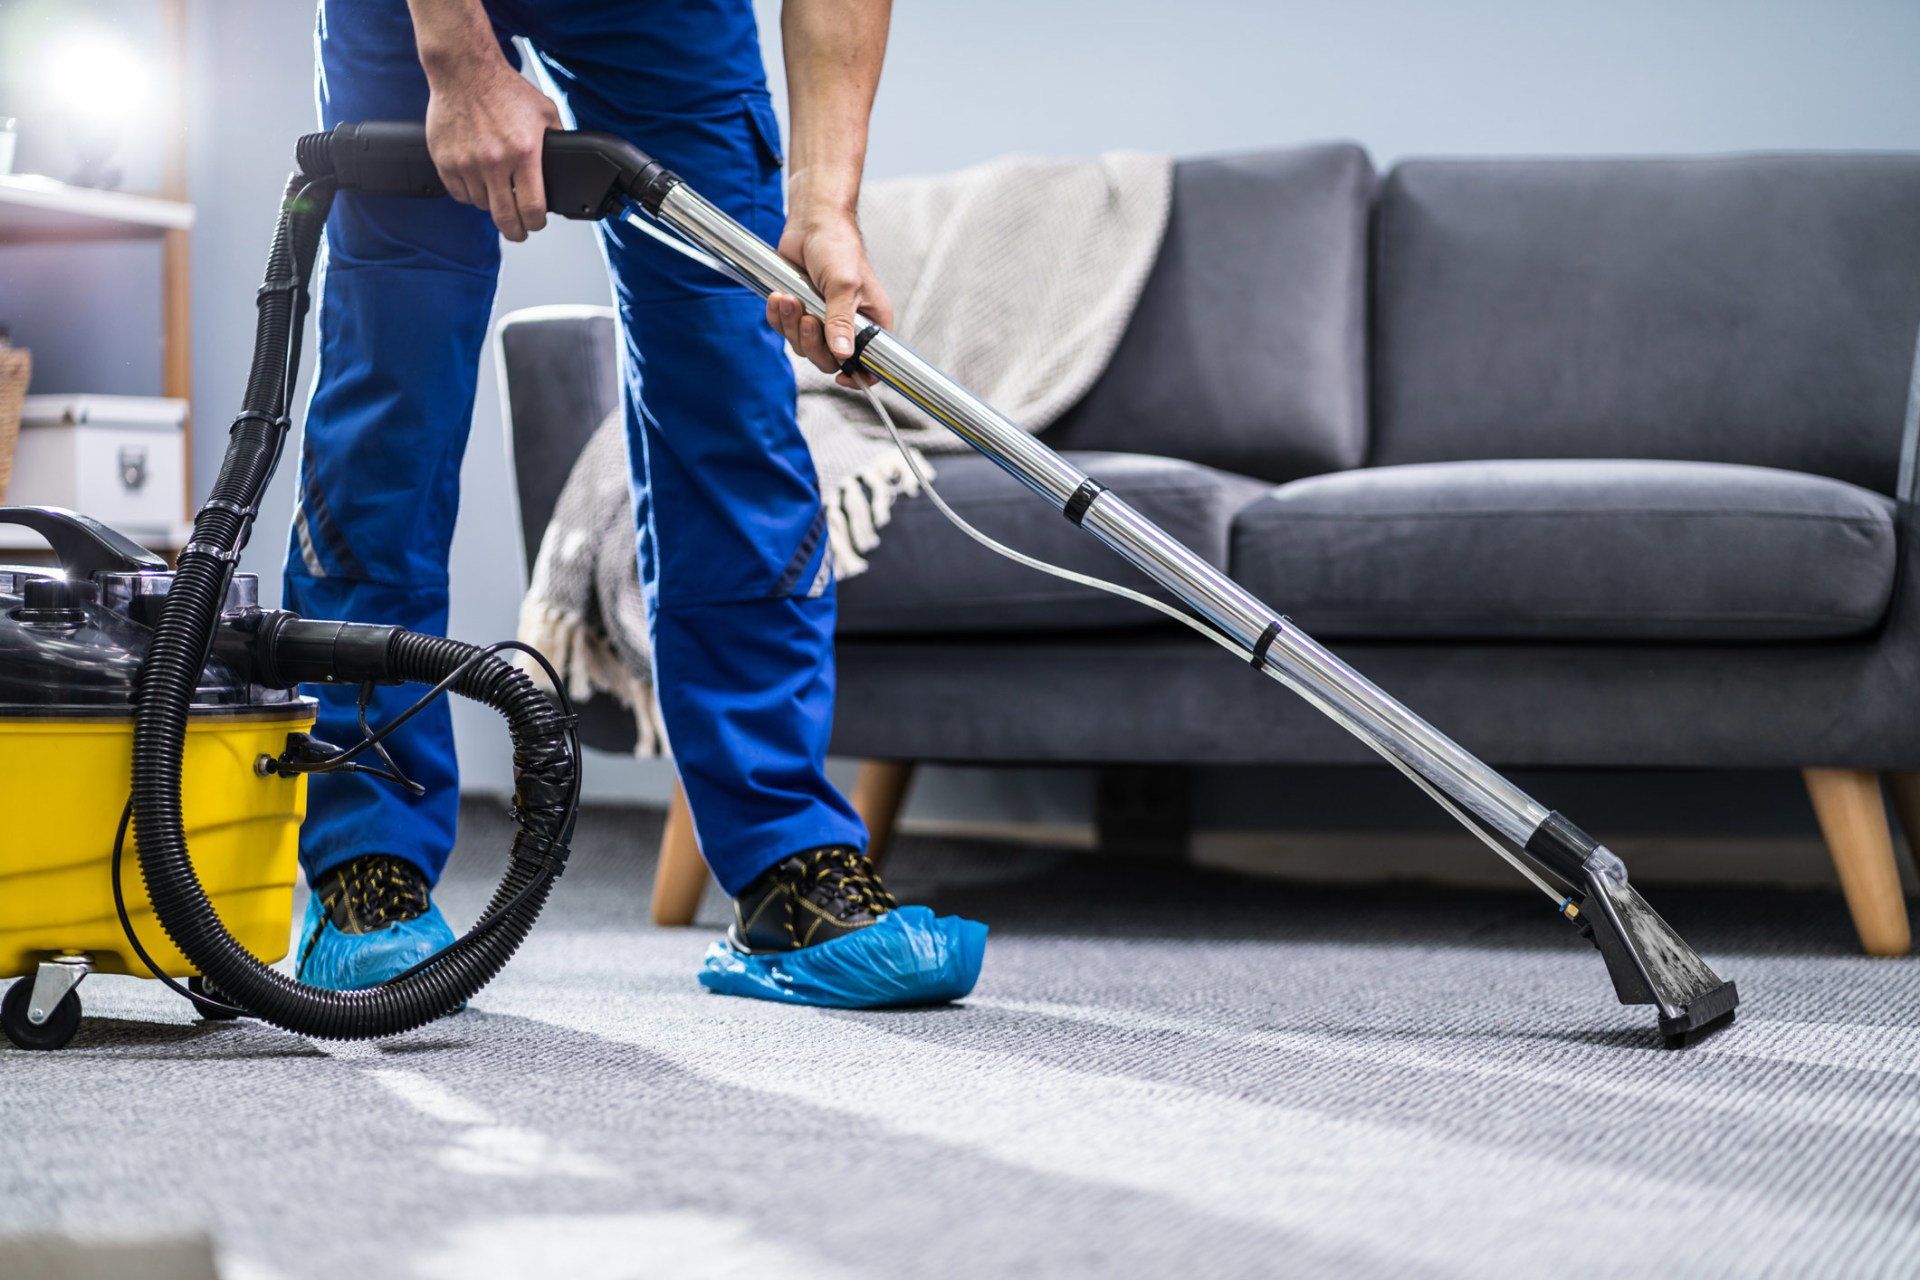 Carpet cleaning Geelong